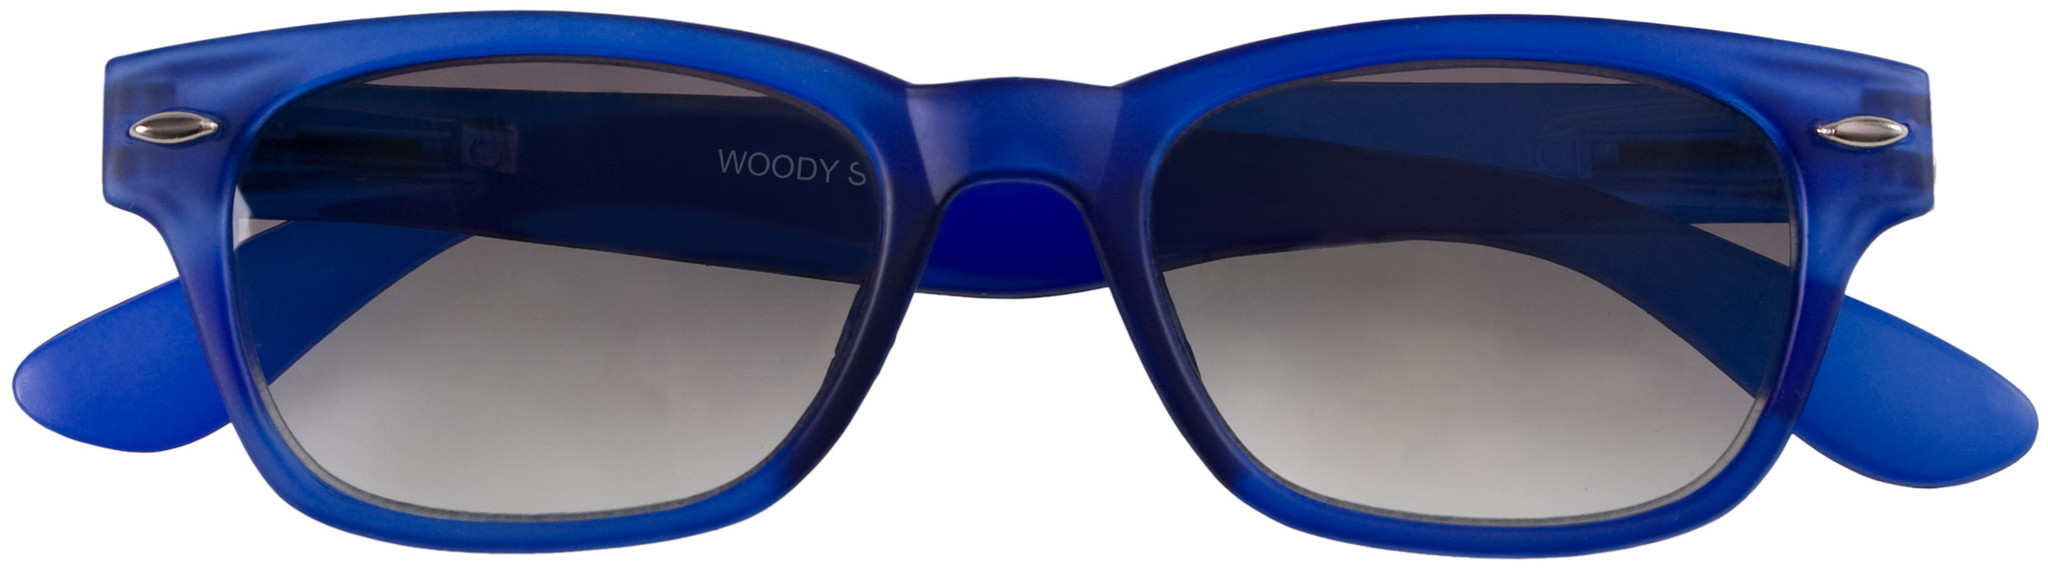 Woody Blue Readers by I Need You Readers